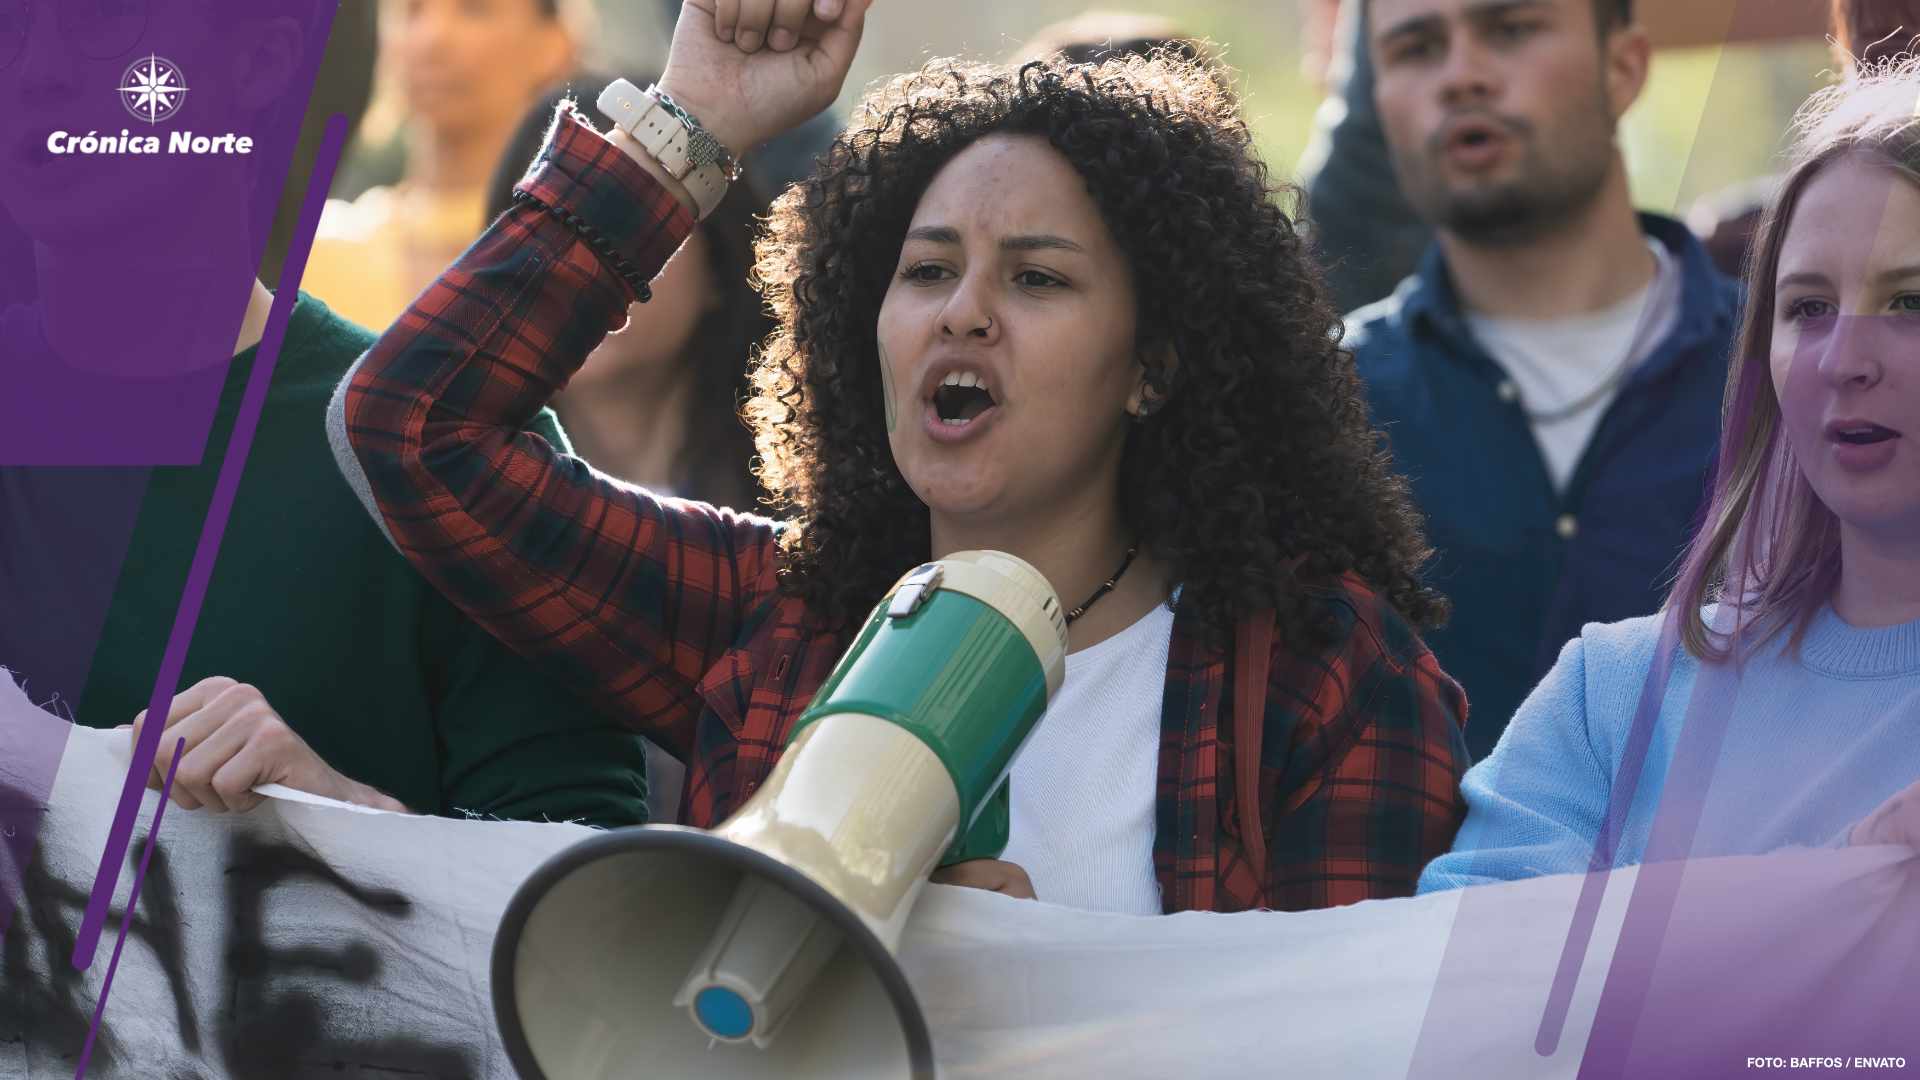 Close-up of a young woman with curly hair, leading a student protest using a megaphone. The group, holding an unidentifiable banner, passionately chants slogans.